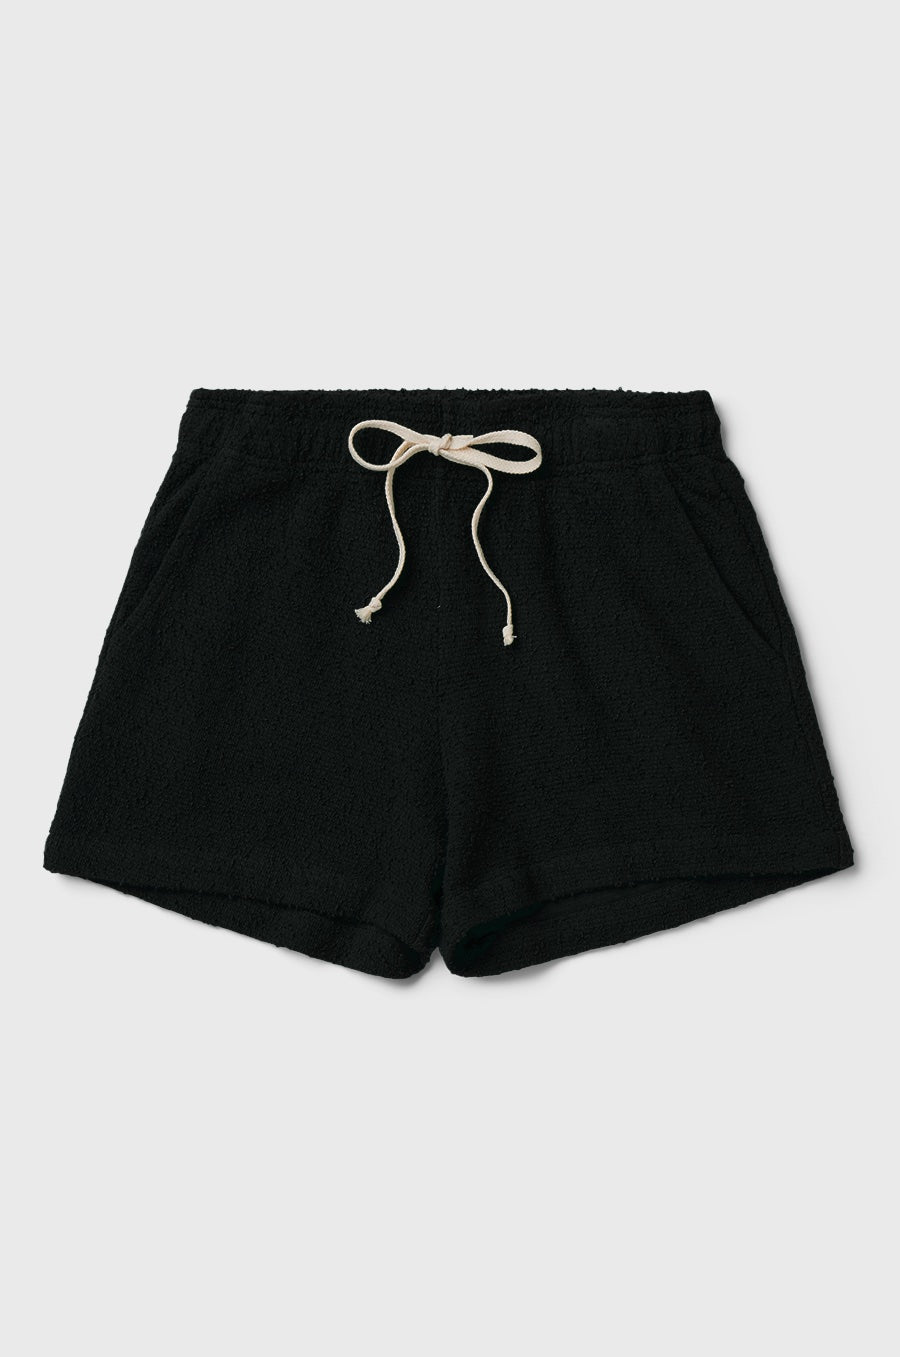 the lady & the sailor Weekend Short in Black Boucle.